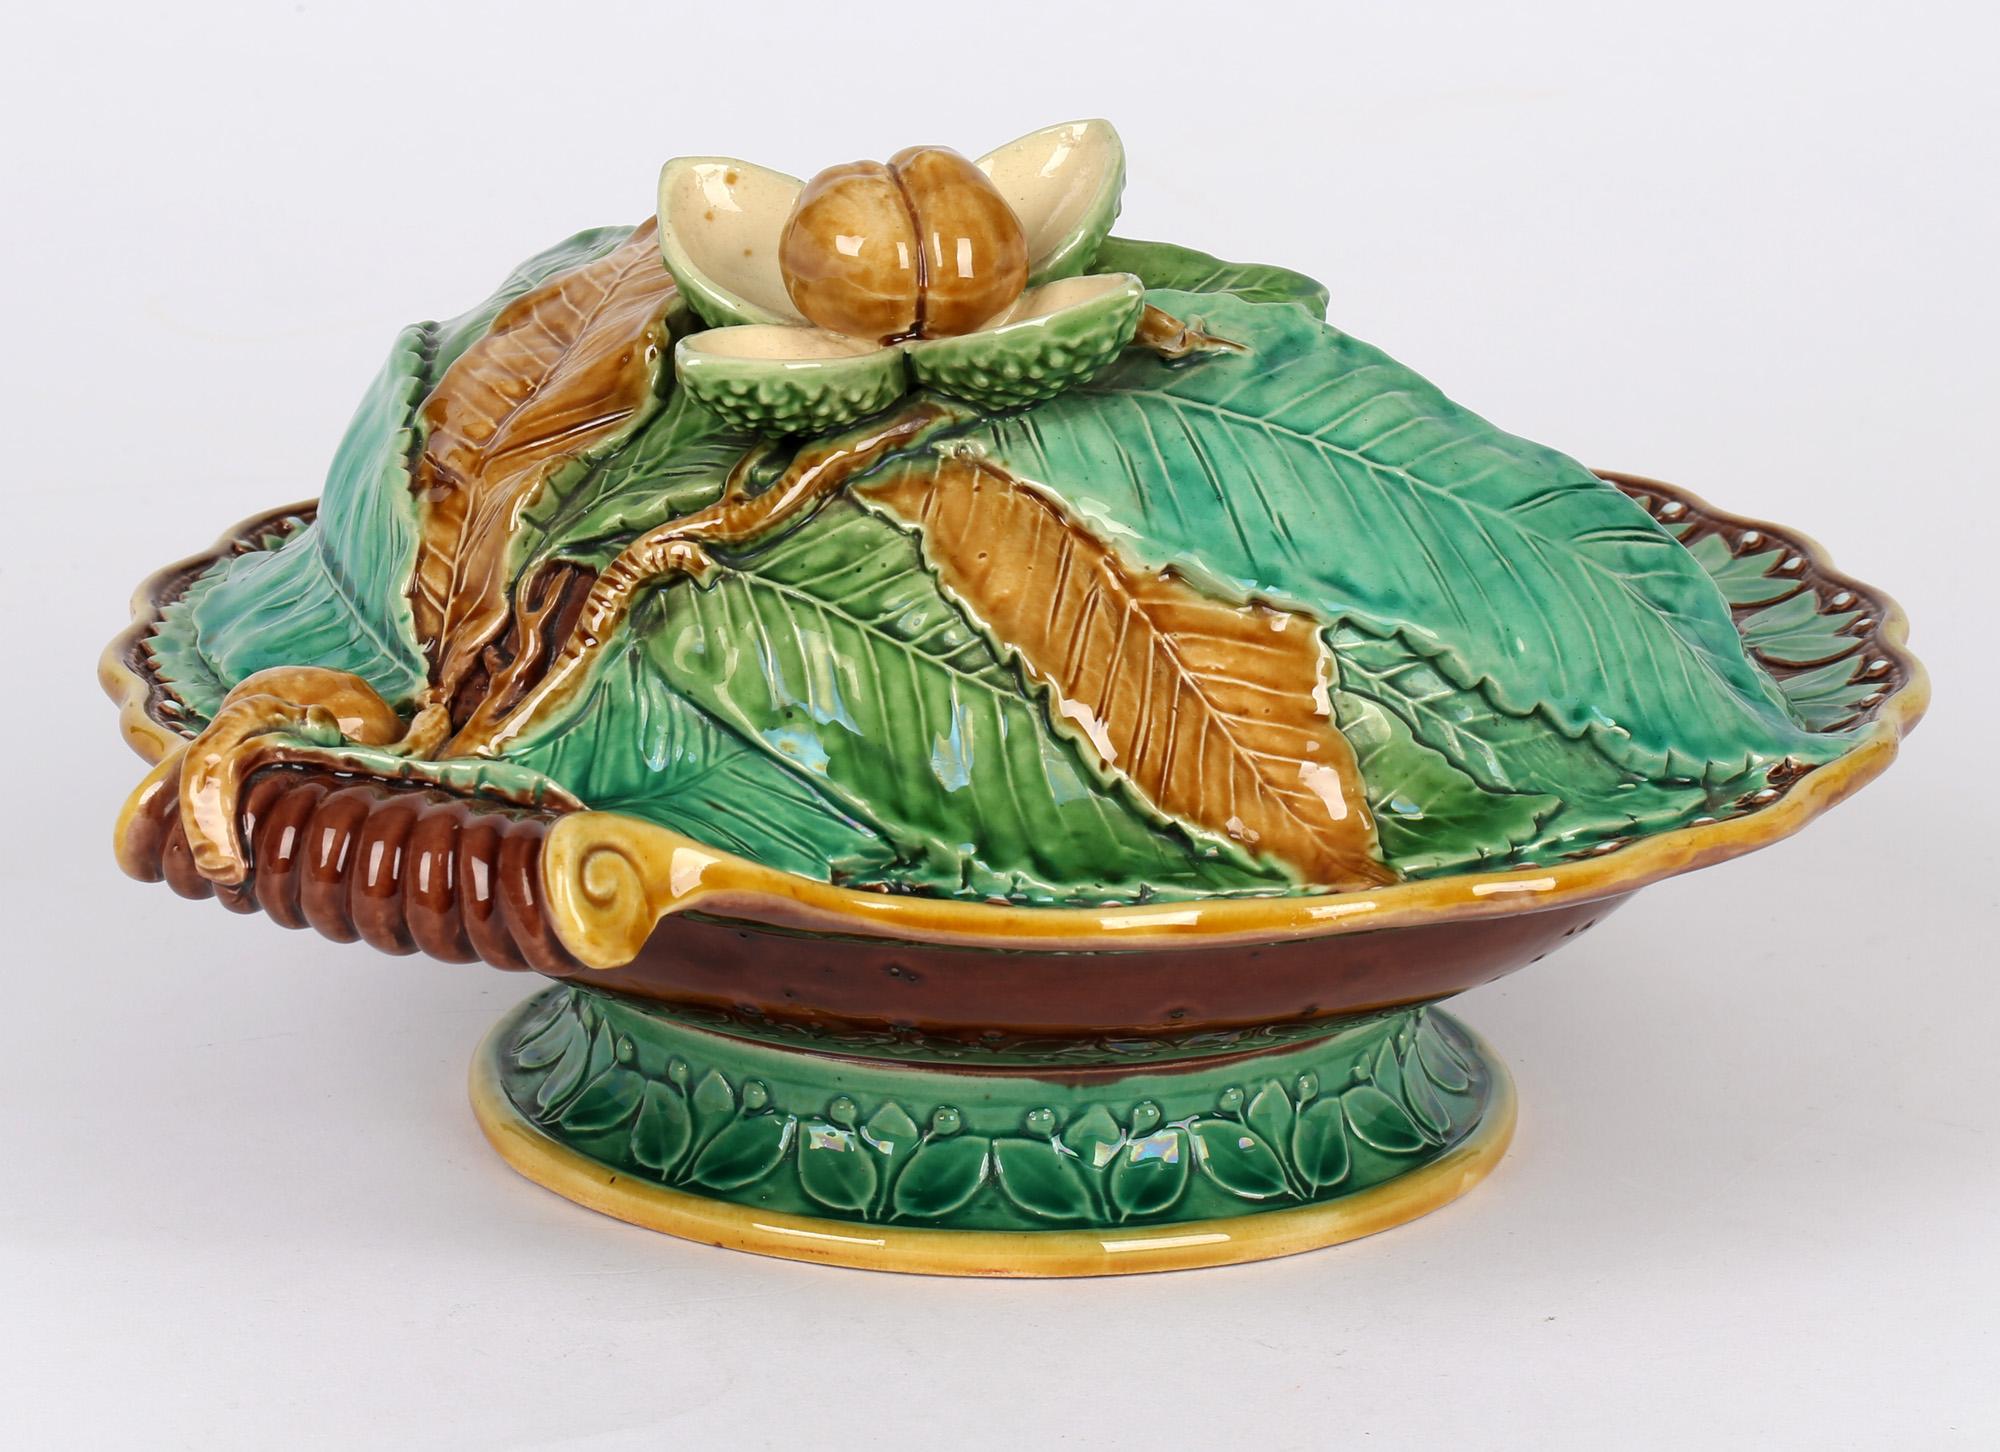 A very fine antique Minton majolica pottery handled pedestal chestnut dish dated 1867. The dish stands on a rounded pedestal foot the edge molded in relief with petal designs supporting a rounded bowl with a curled handle to one side and with